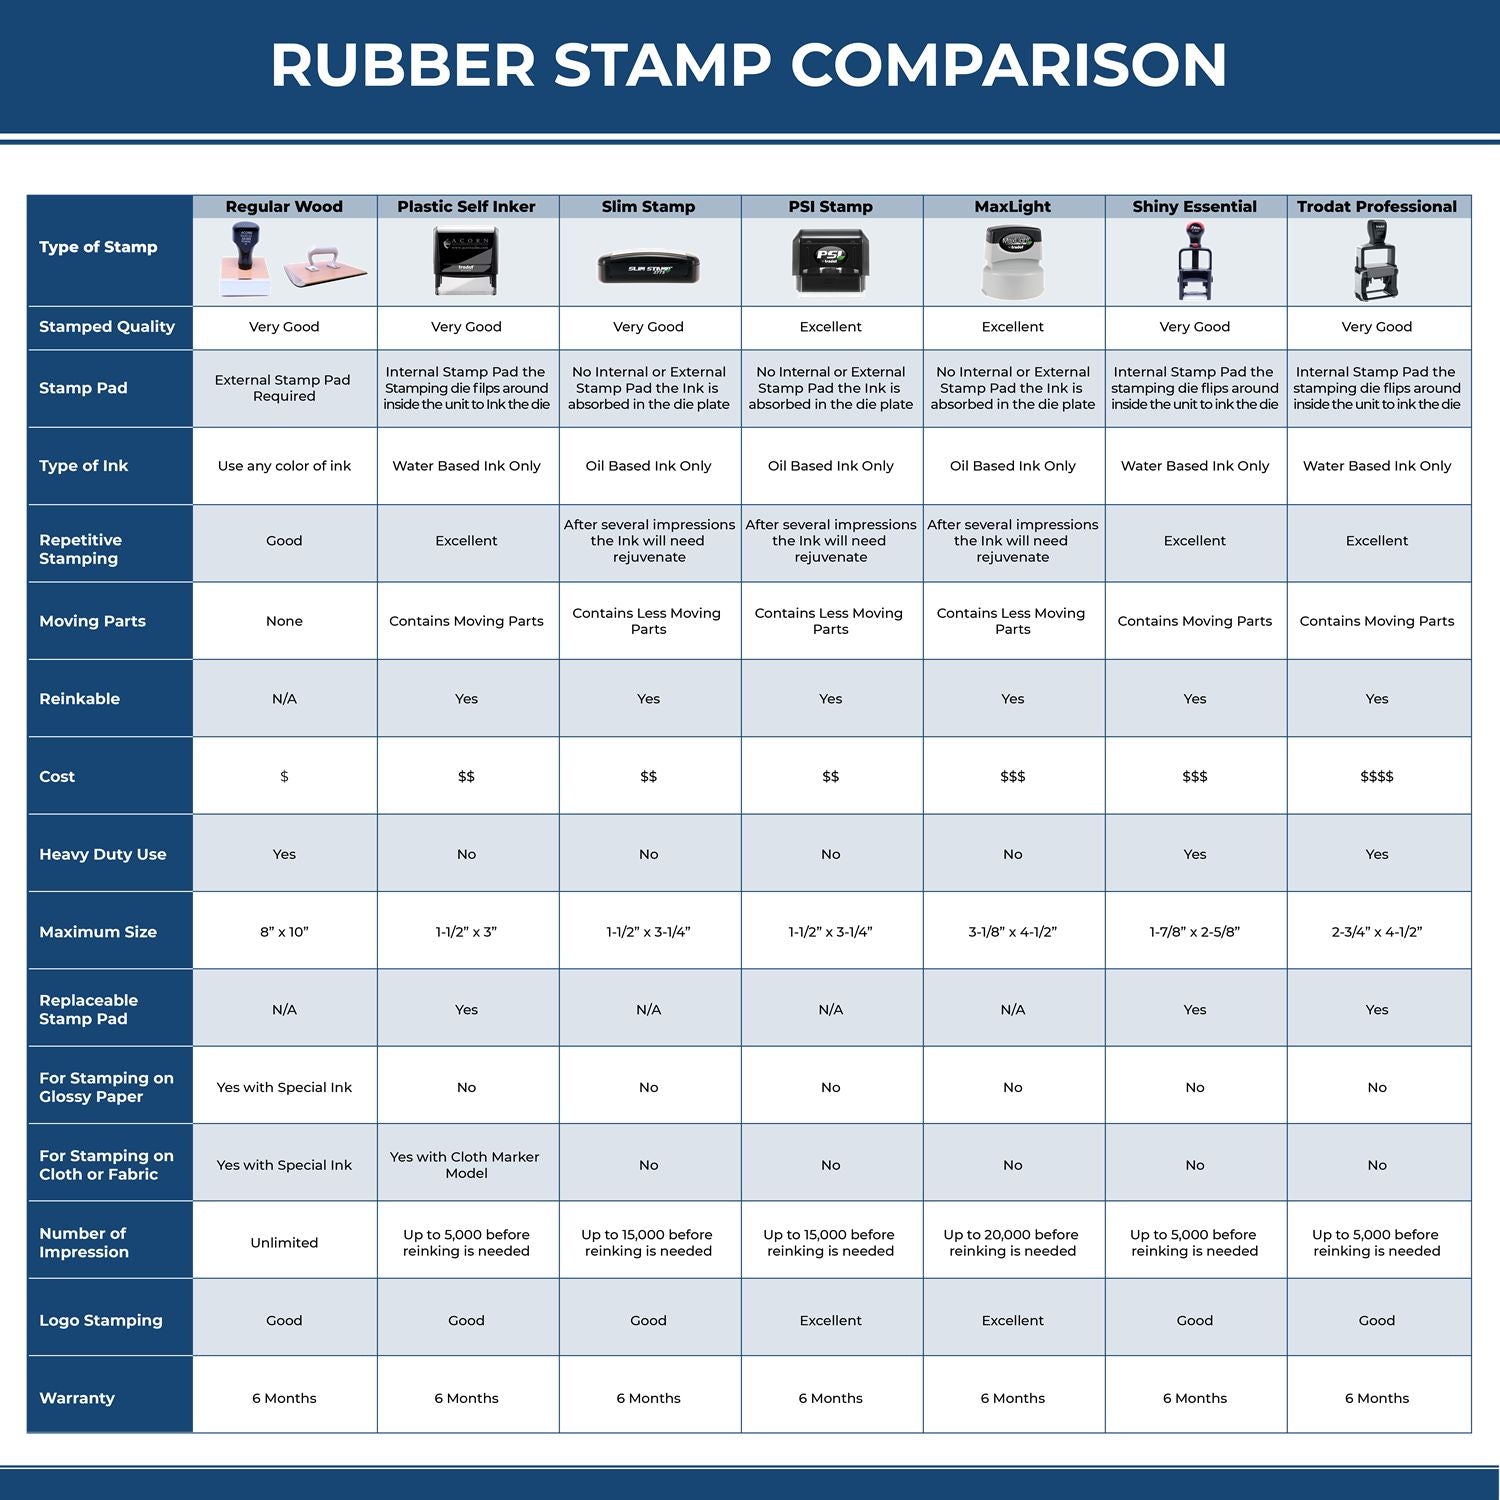 A comparison chart for the different types of mount models available for the Self-Inking Indiana PE Stamp.